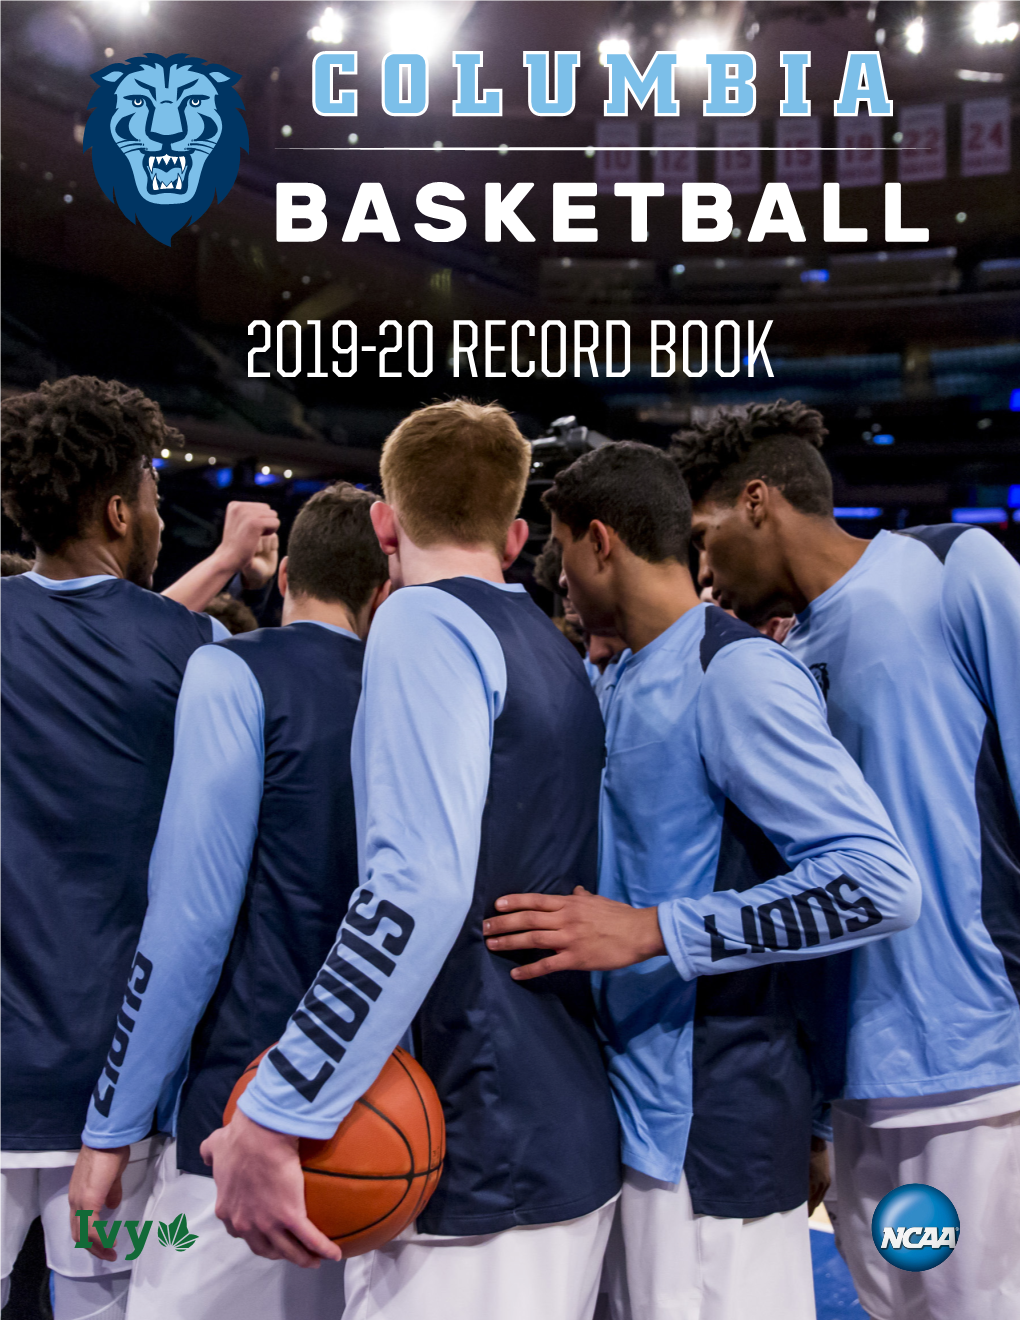 2019-20 Record Book Follow the Lions on Social Media